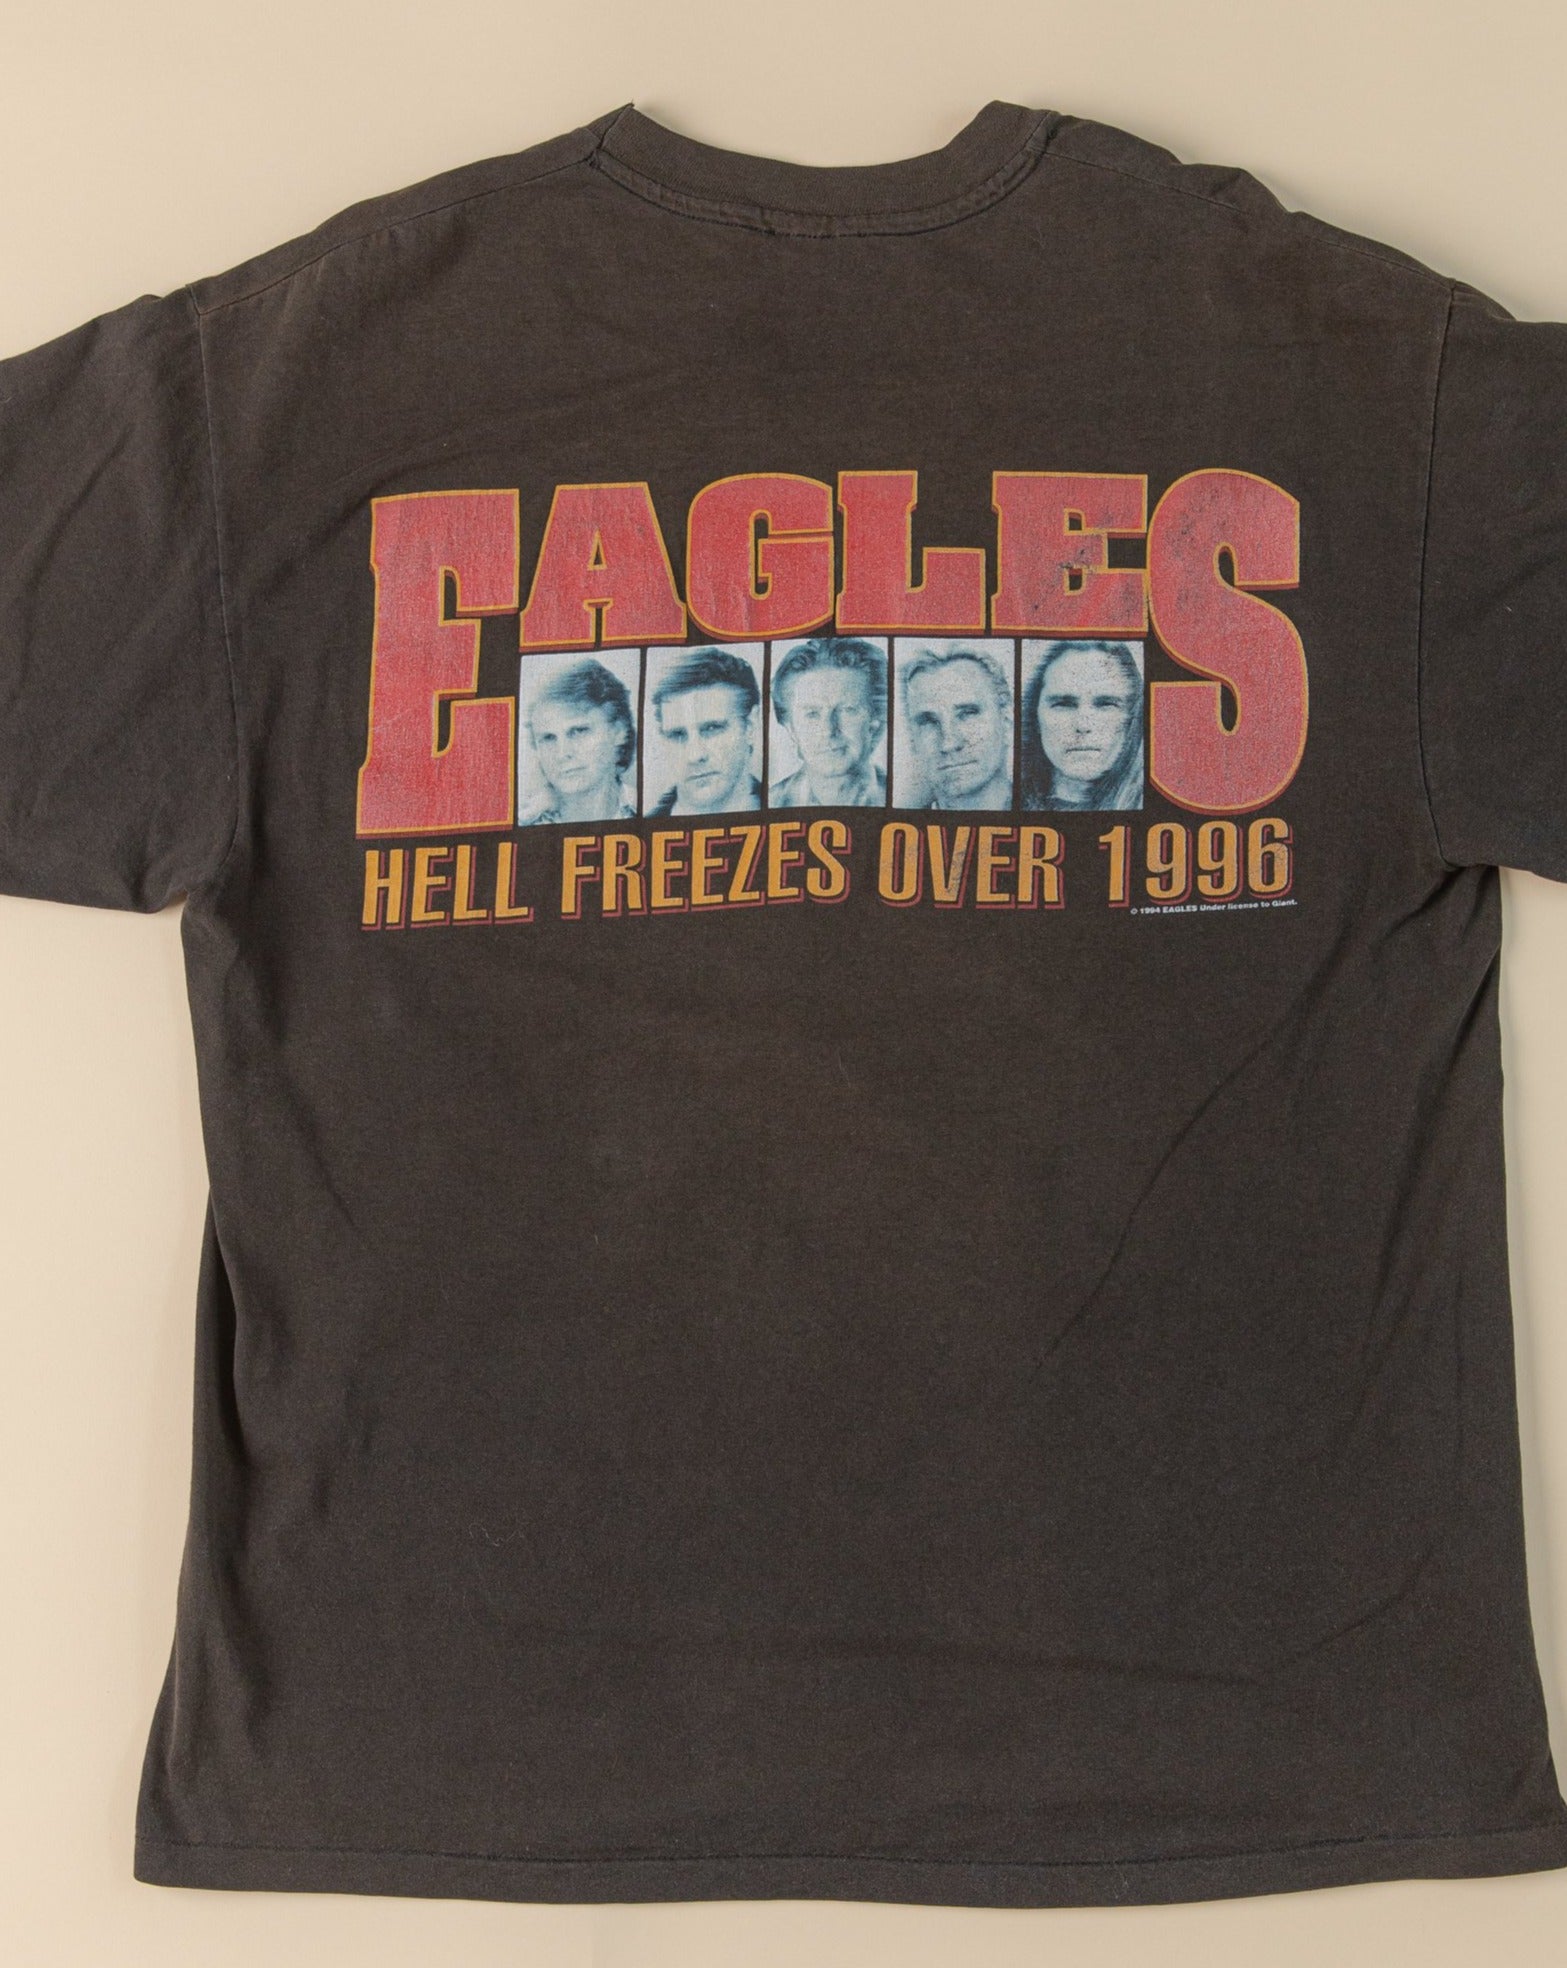 Vintage 1990's EAGLES t-Shirt | 1996 ''Hell Freezes Over Tour